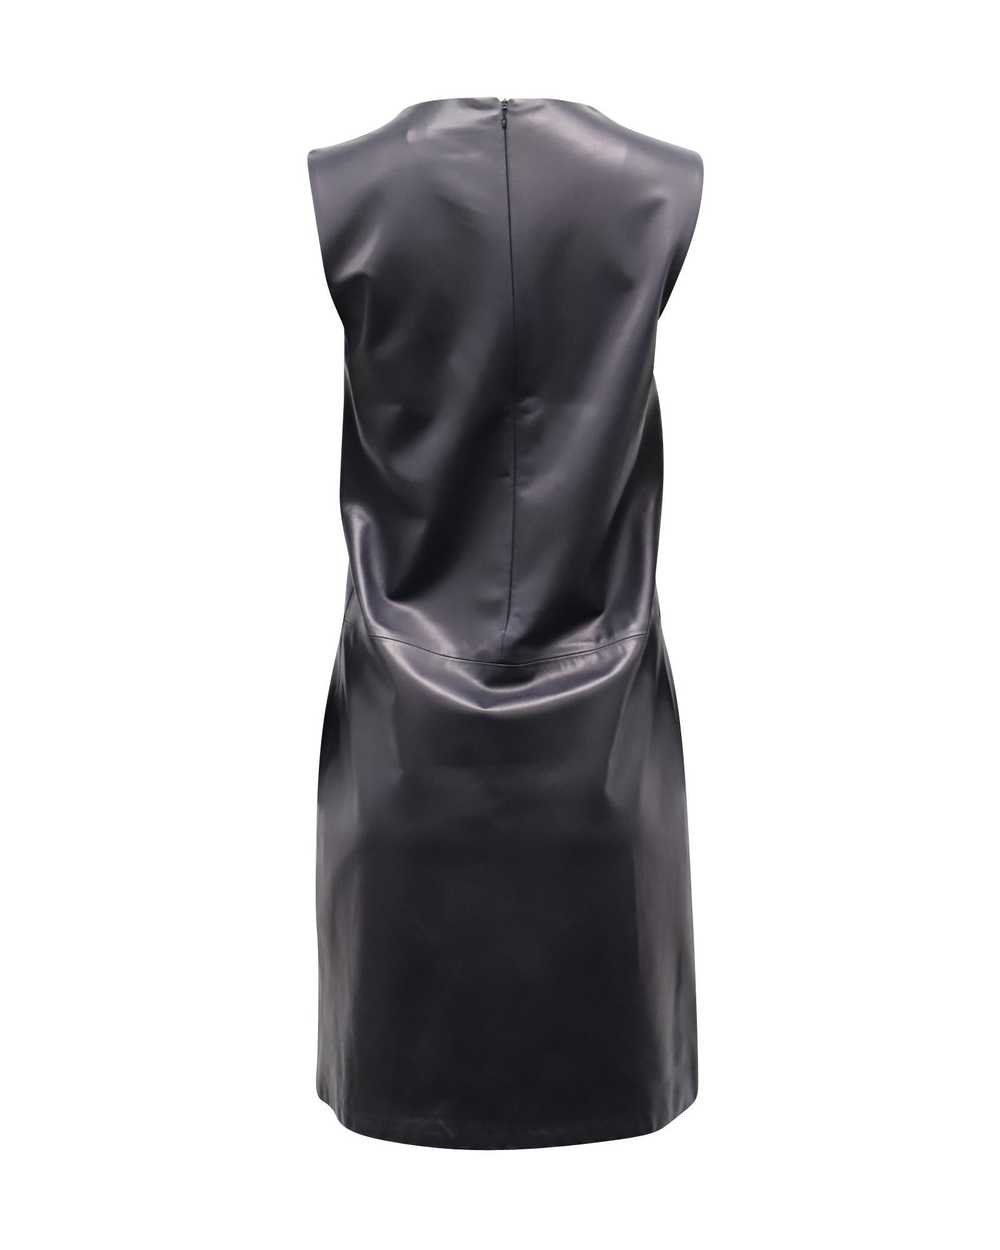 The Row Black Leather V-Neck Mini Dress by The Row - image 3